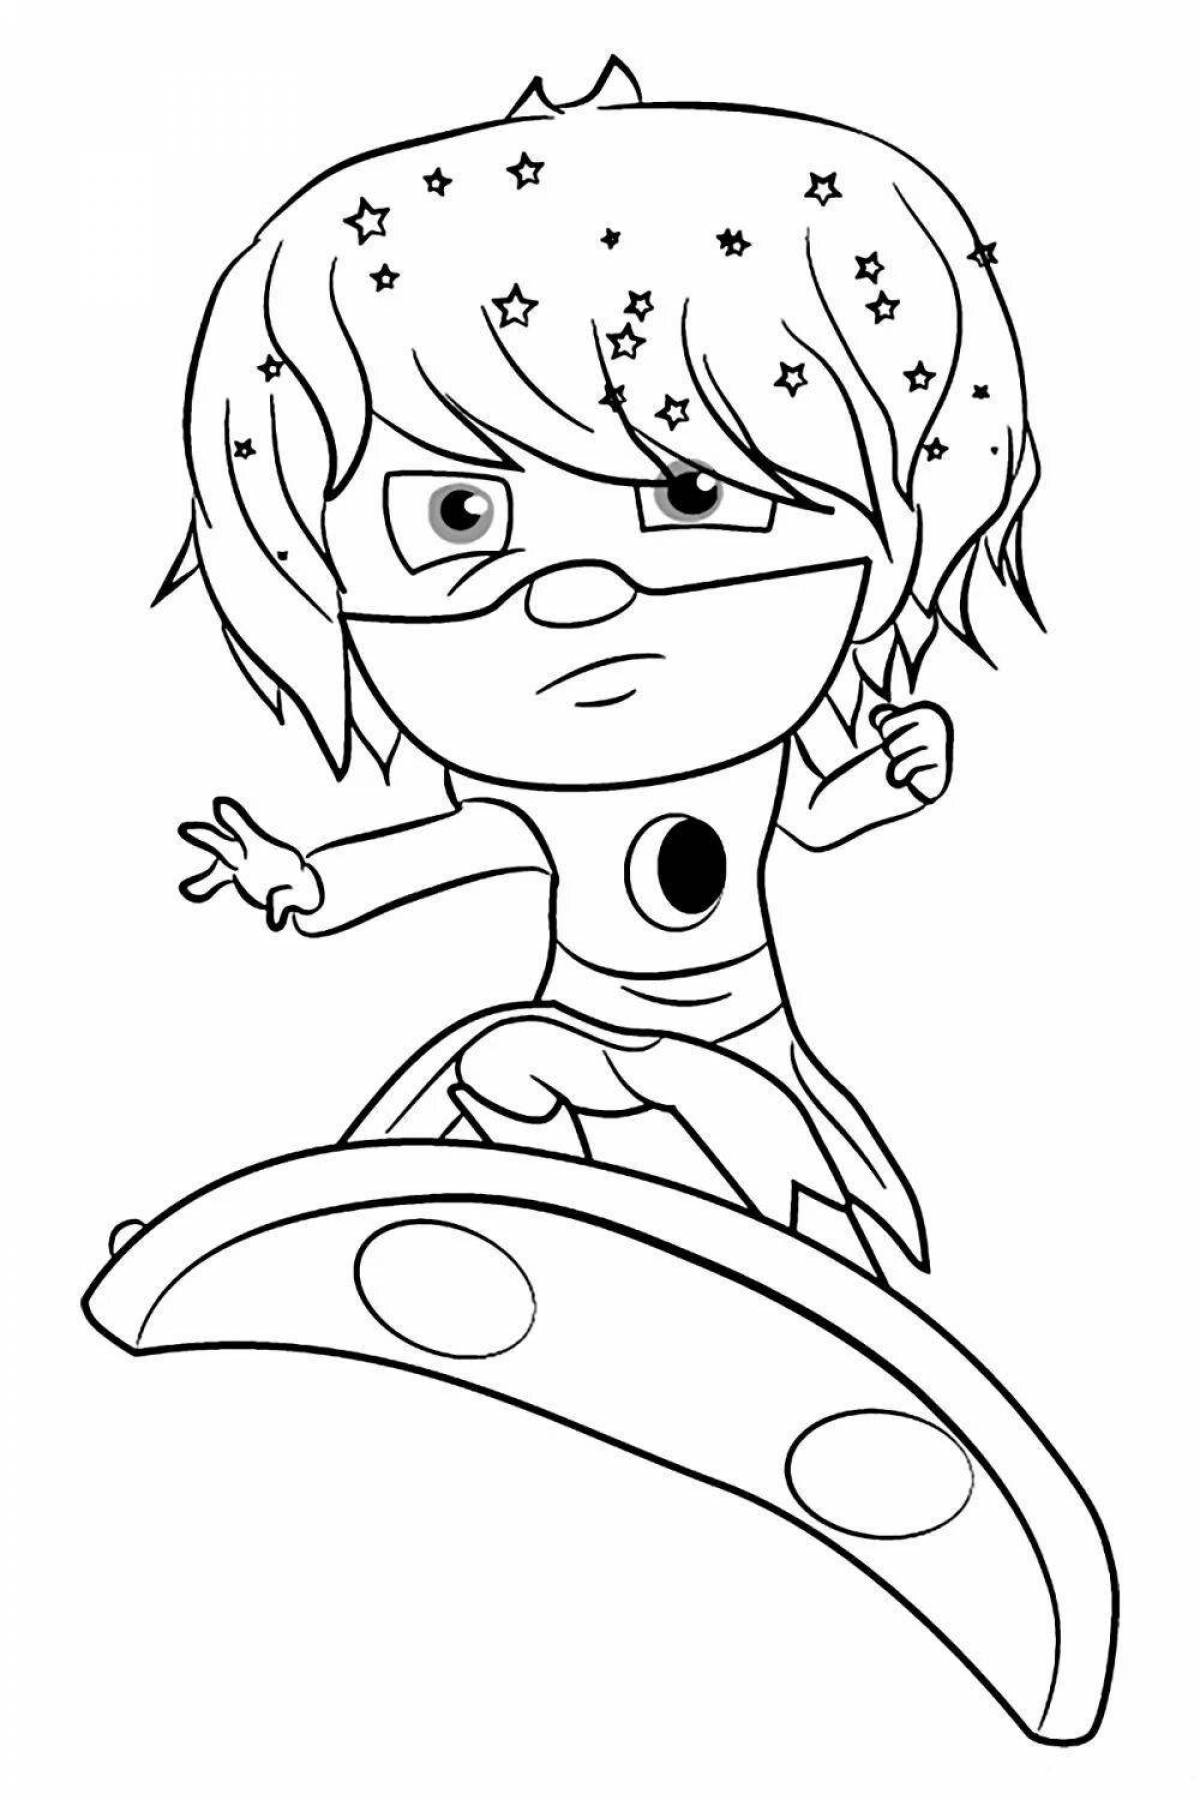 Dynamic romeo coloring page